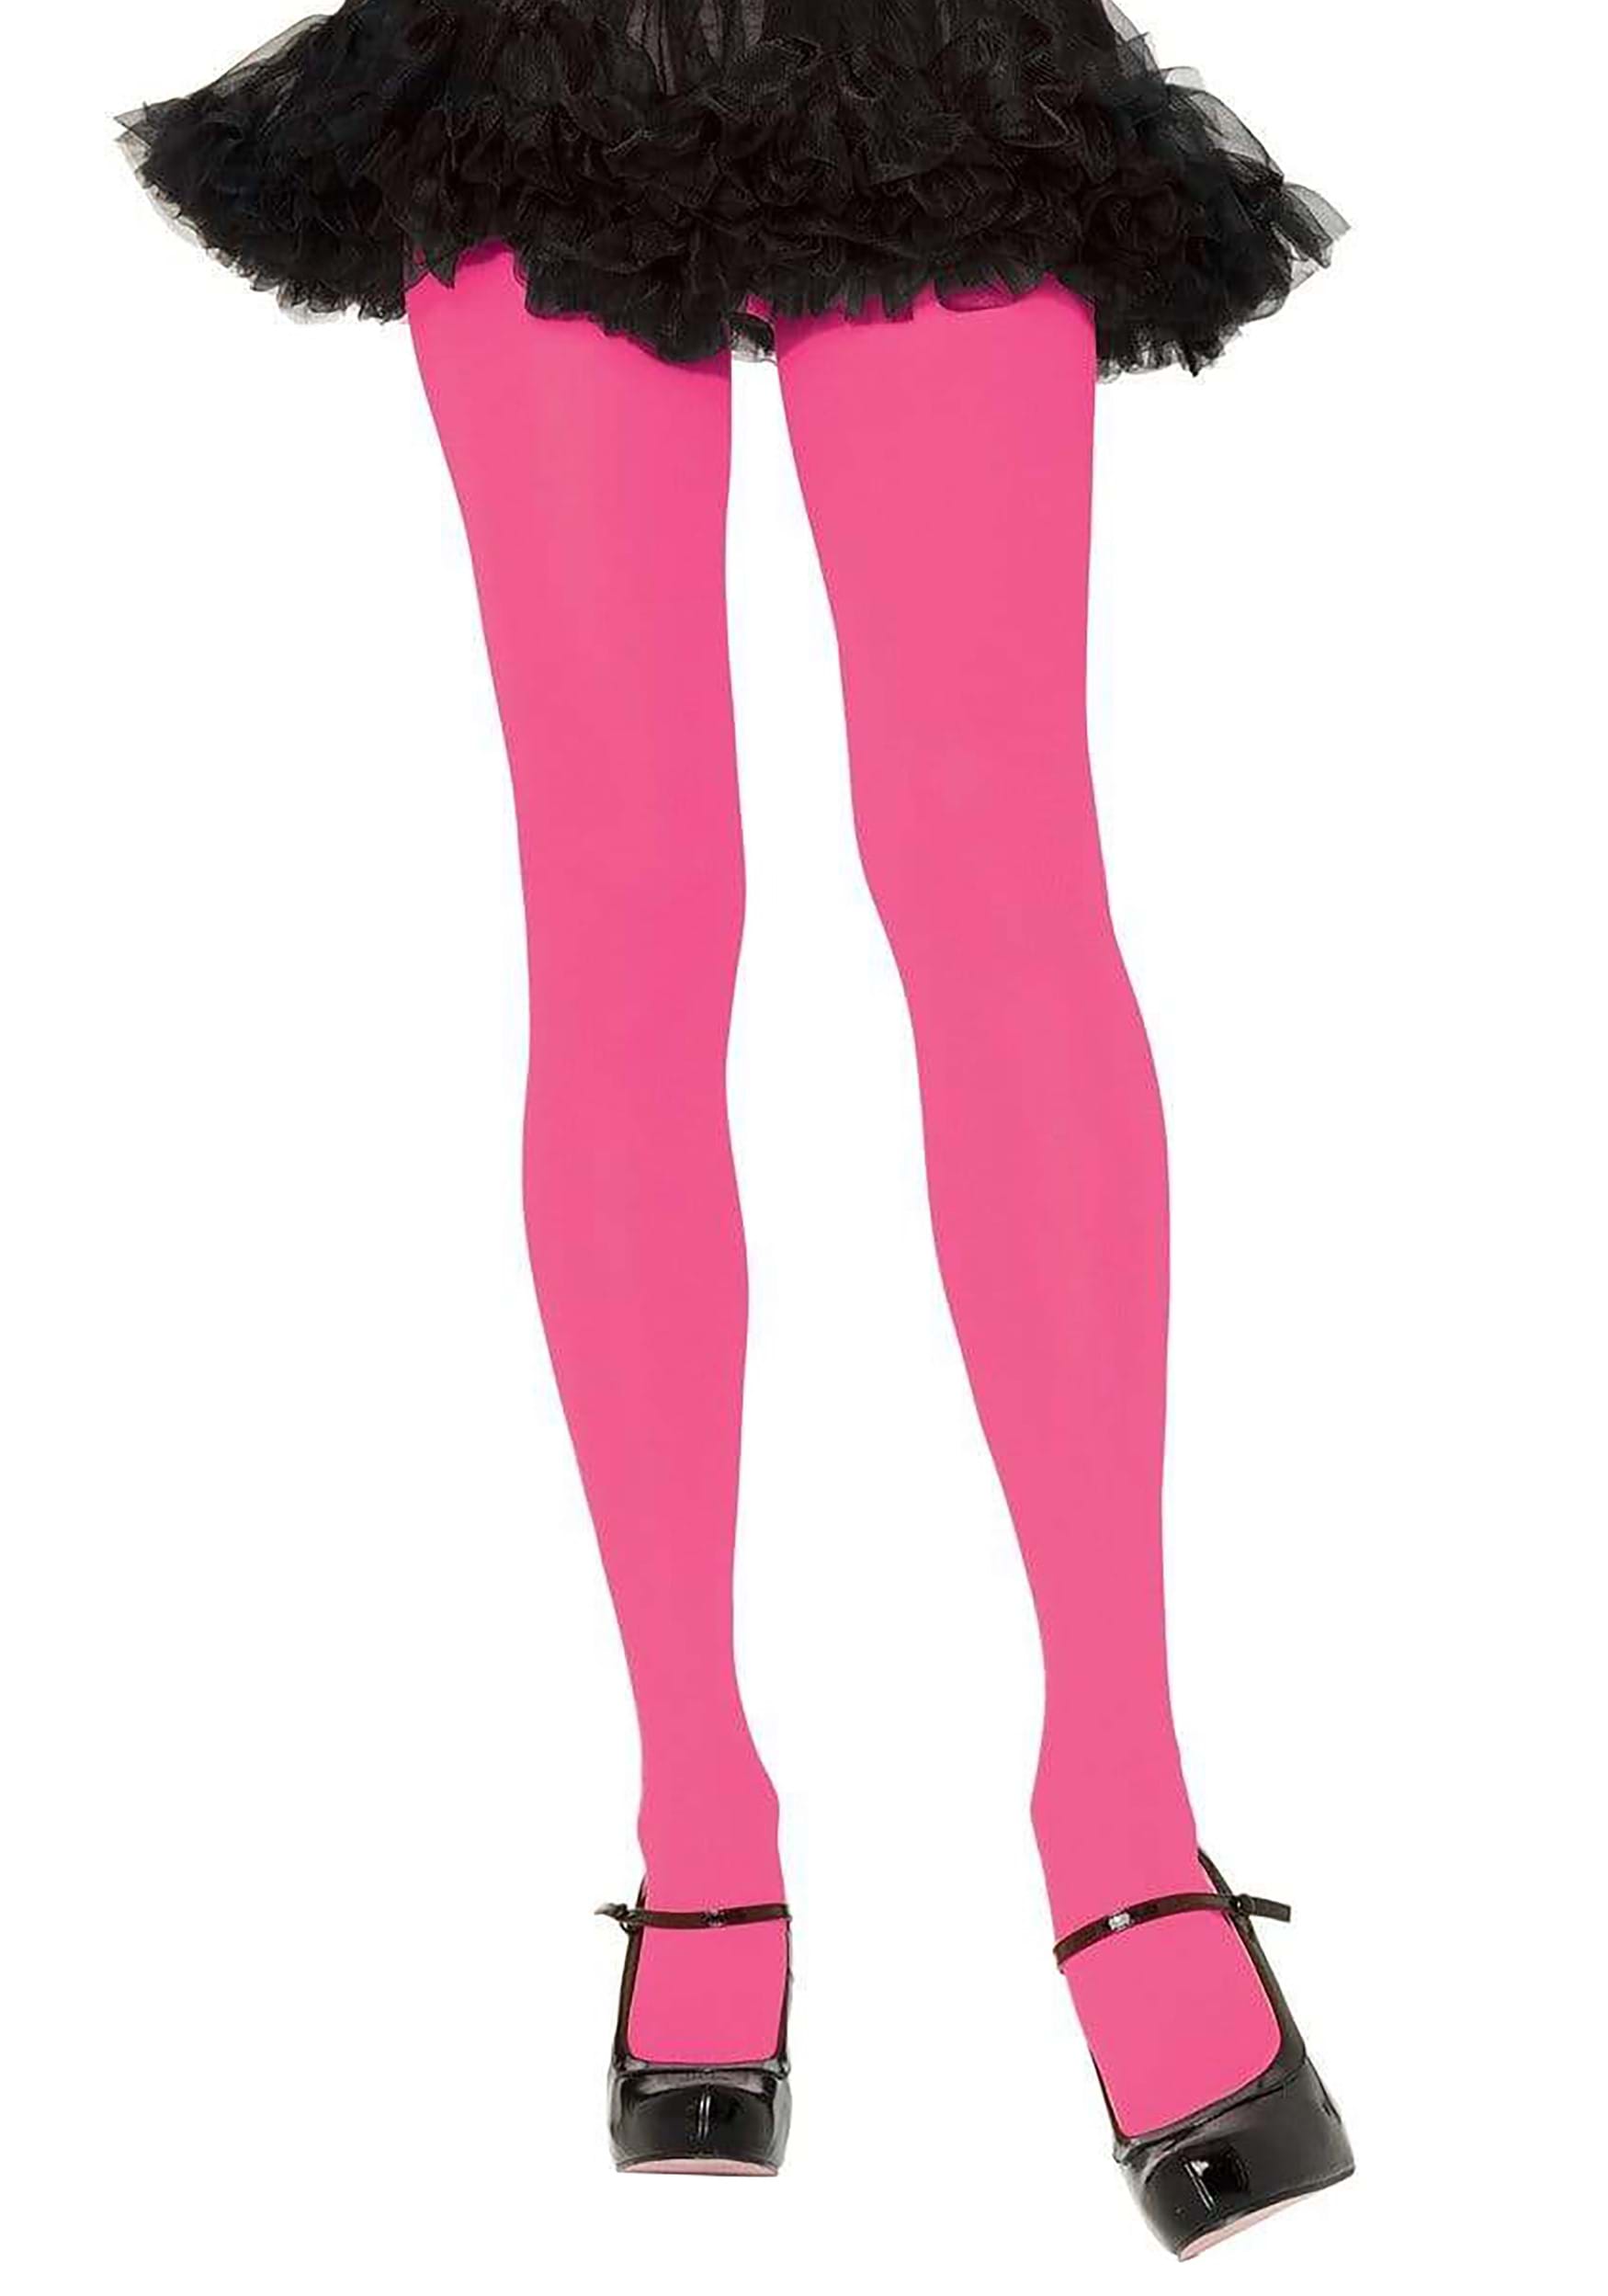 https://images.halloweencostumes.ca/products/71968/1-1/womens-pink-nylon-opaque-tights.jpg